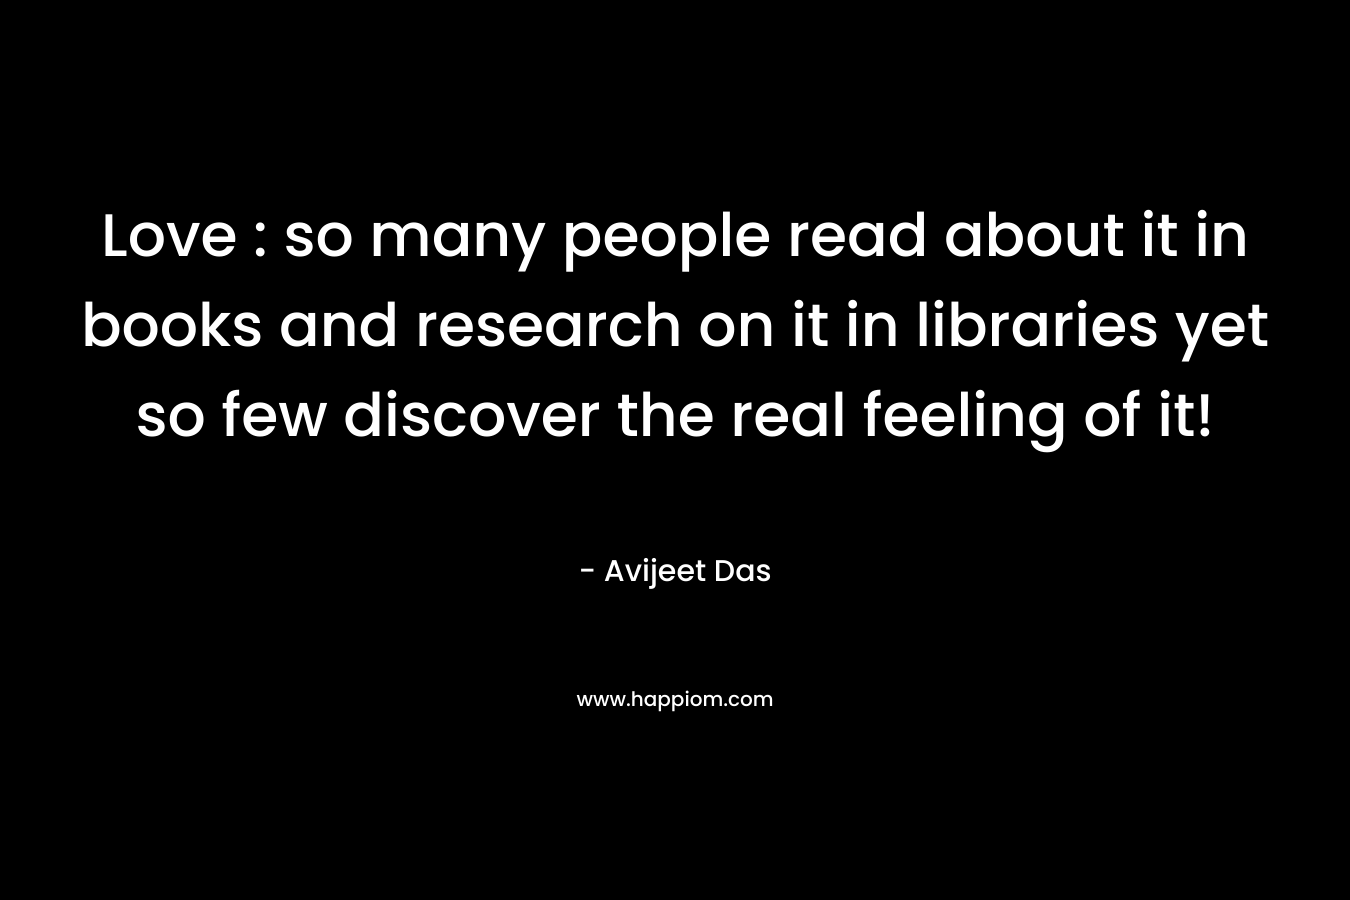 Love : so many people read about it in books and research on it in libraries yet so few discover the real feeling of it!